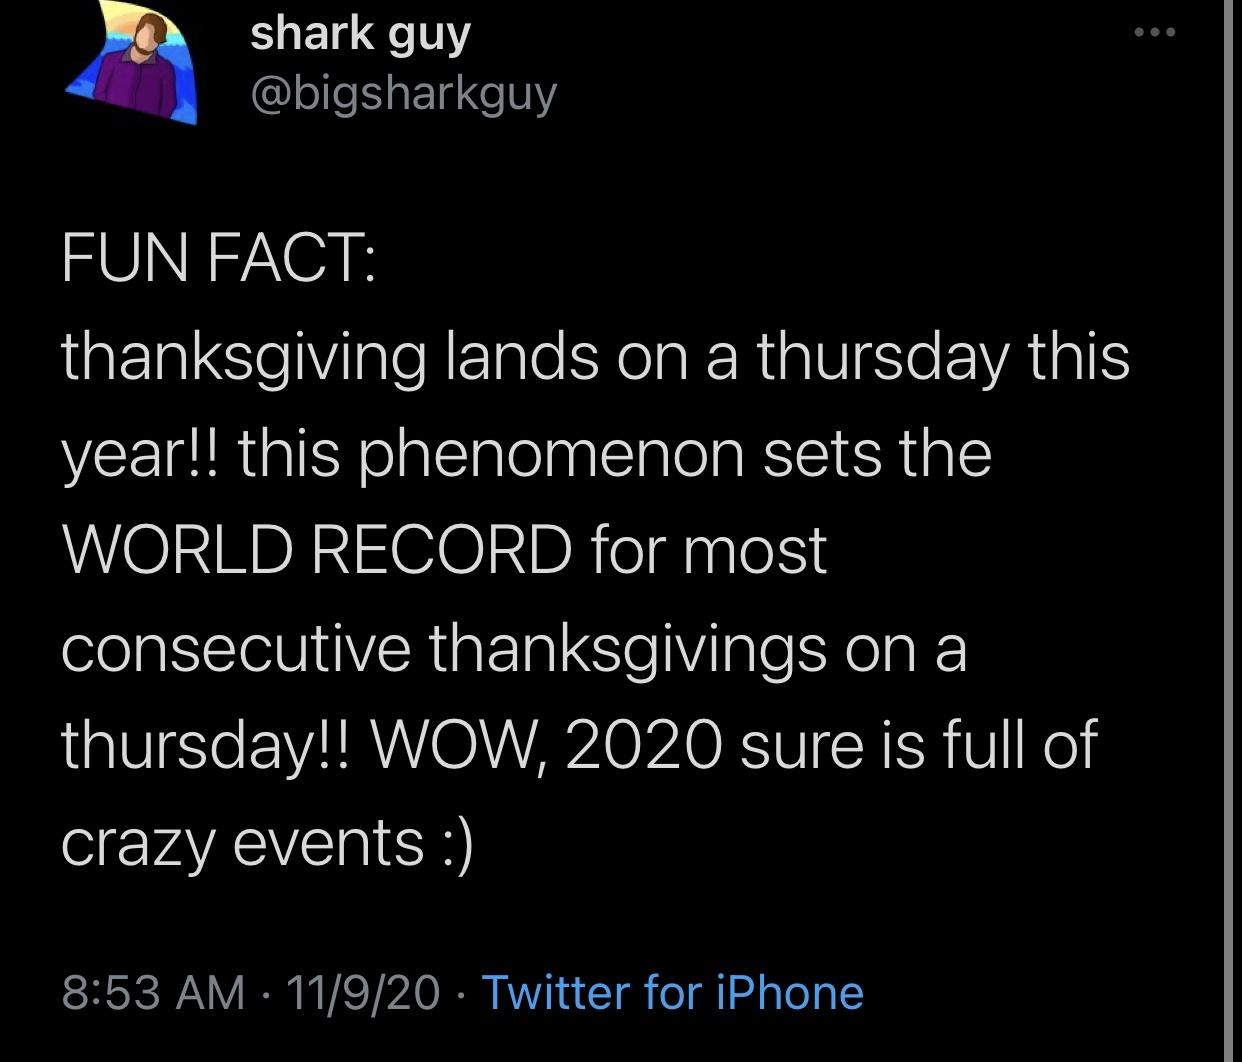 atmosphere - shark guy Fun Fact thanksgiving lands on a thursday this year!! this phenomenon sets the World Record for most consecutive thanksgivings on a thursday!! Wow, 2020 sure is full of crazy events 11920 Twitter for iPhone